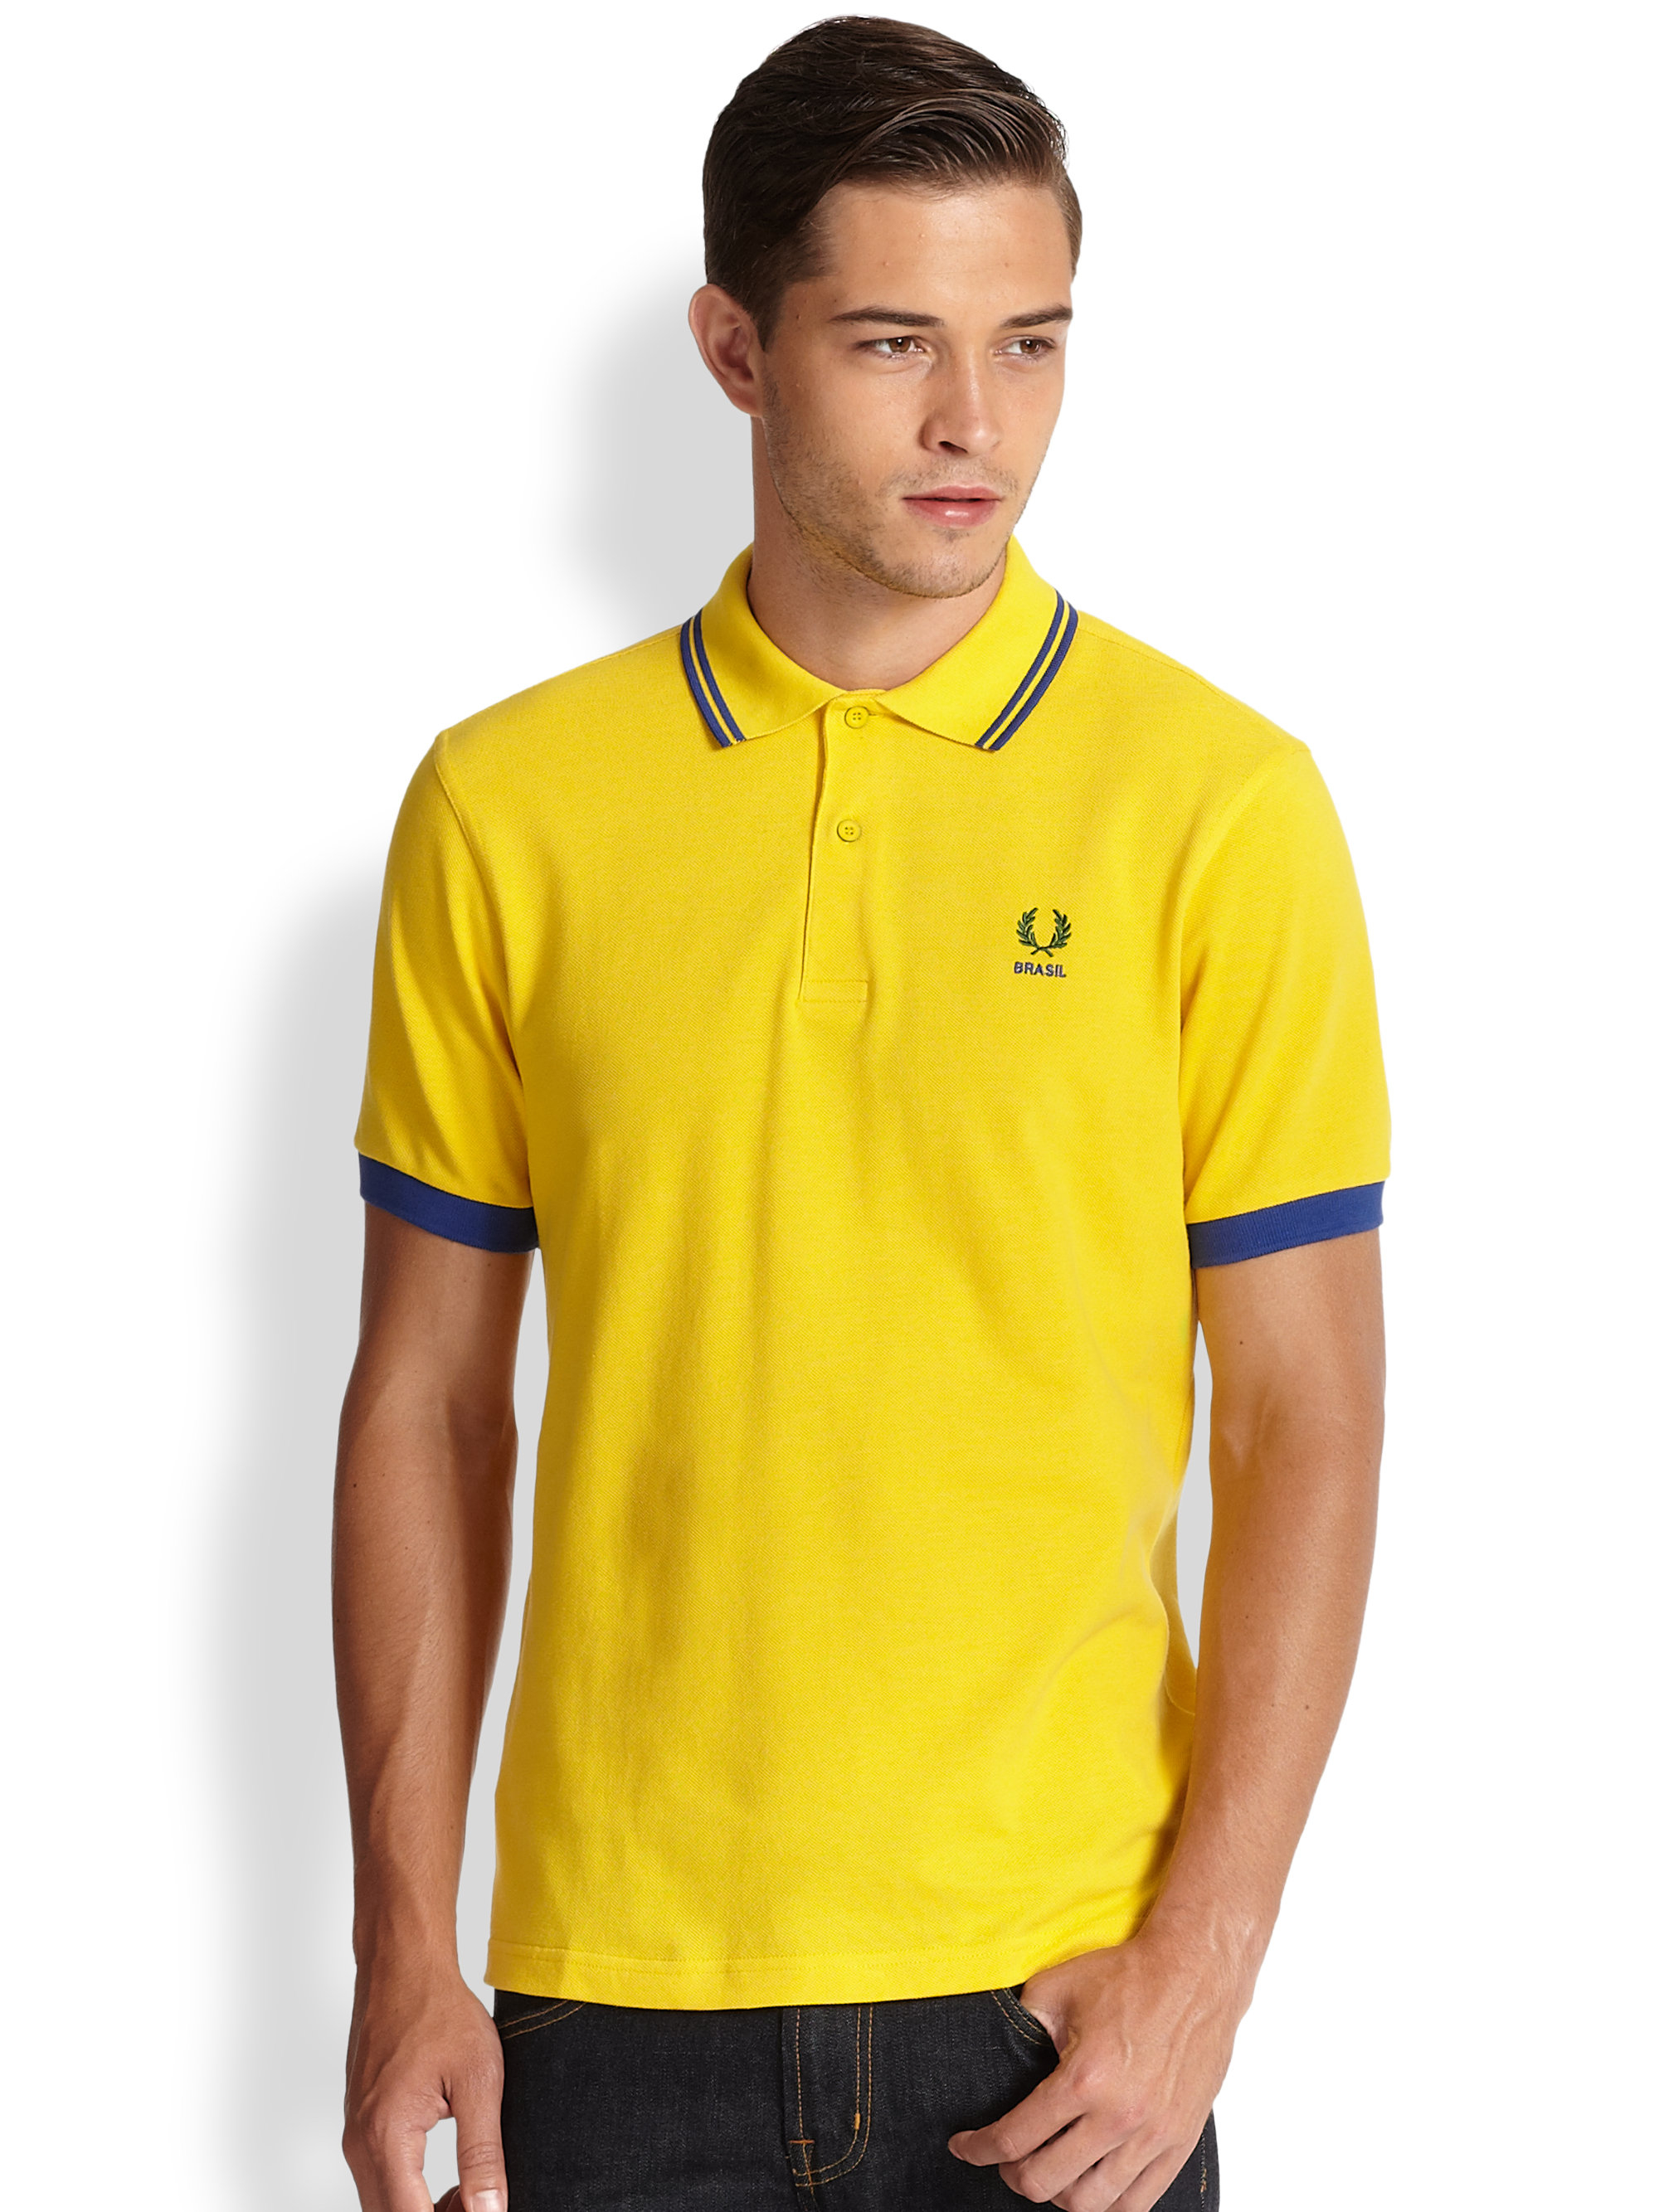 Fred Perry Brazil World Cup Polo in Yellow for Men - Lyst